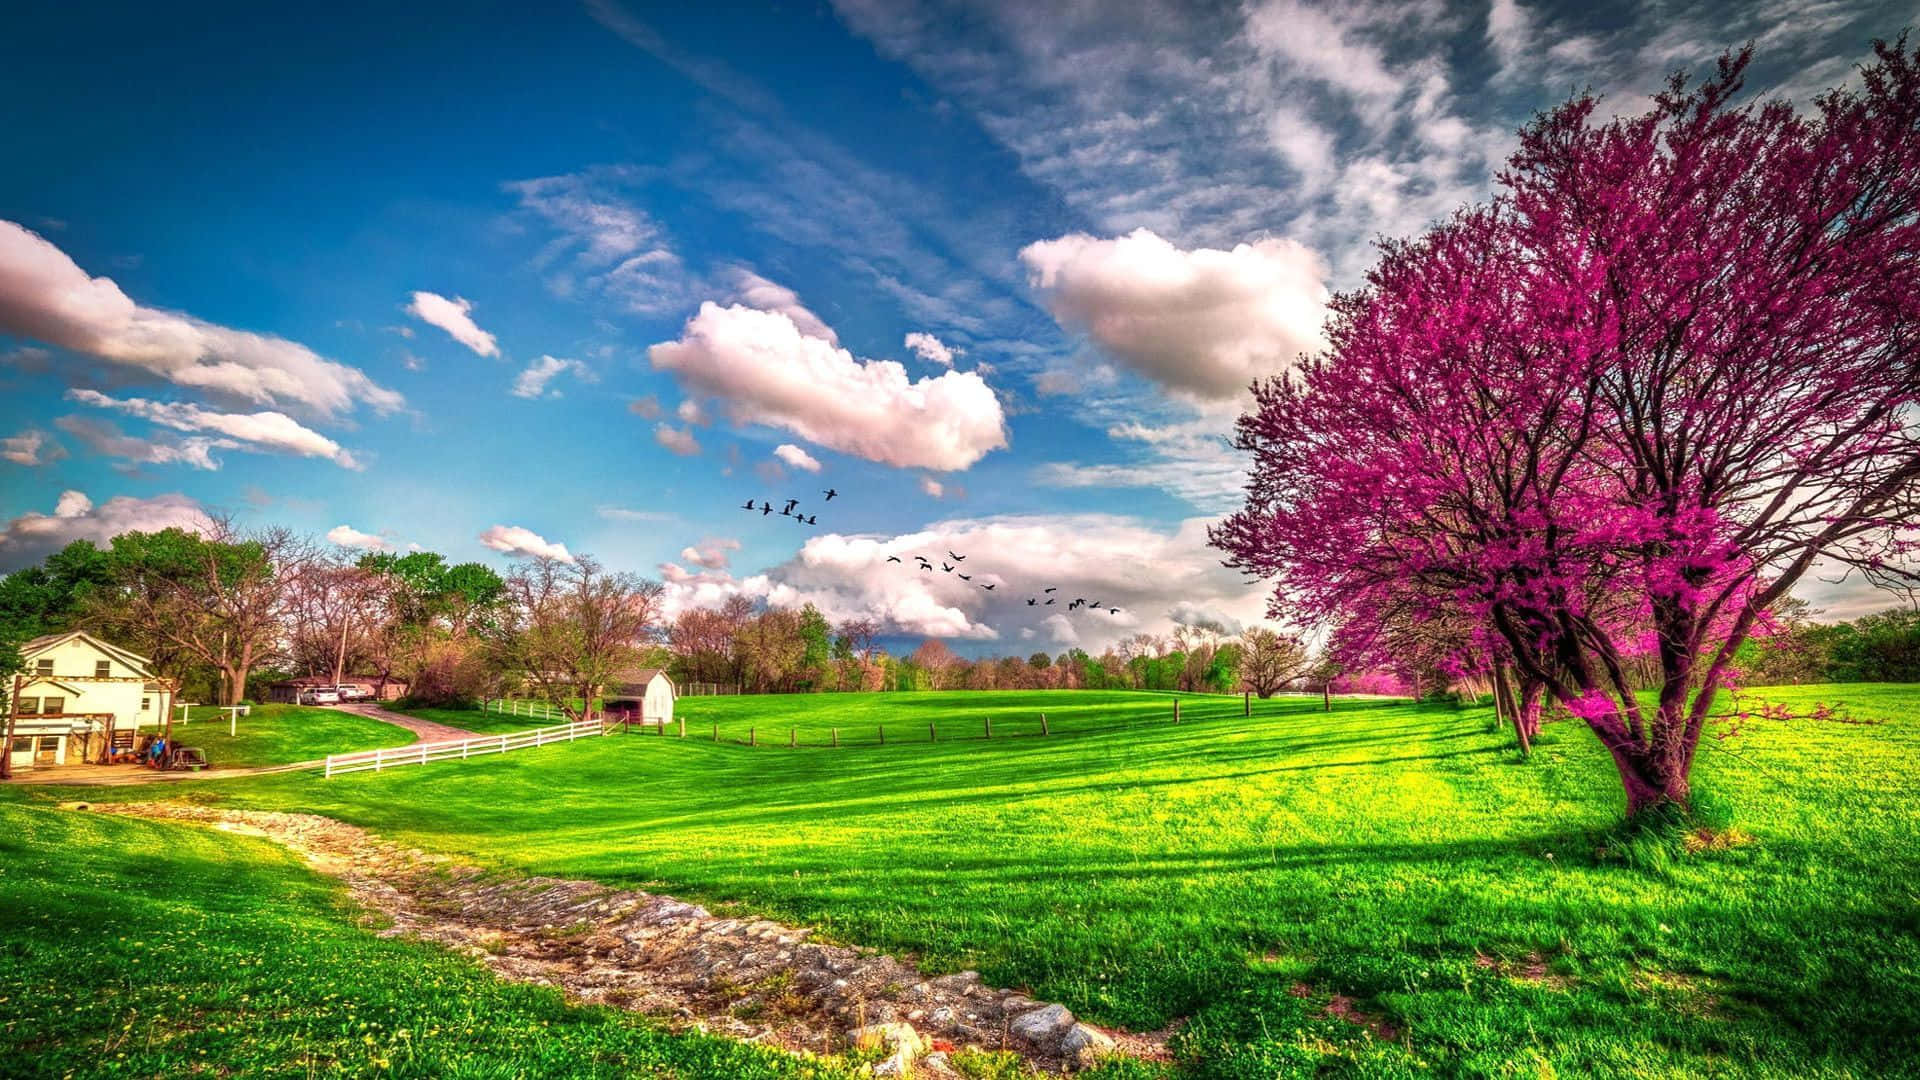 Caption: Lush Spring Landscape with Flowering Trees and Blue Sky Wallpaper